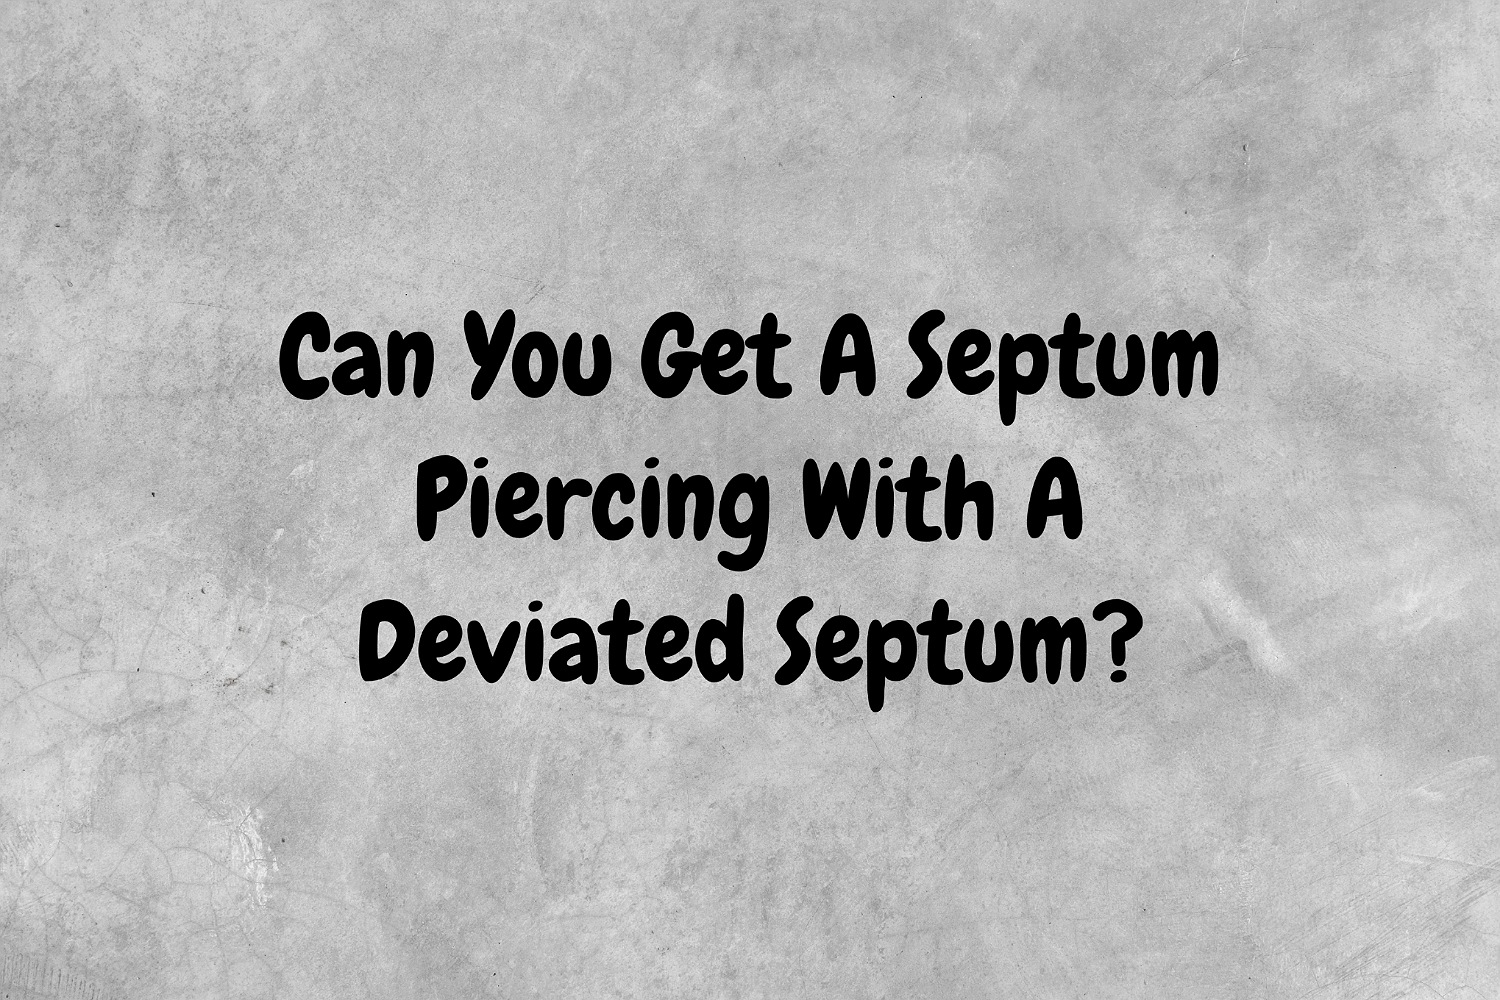 Can You Get A Septum Piercing With A Deviated Septum?